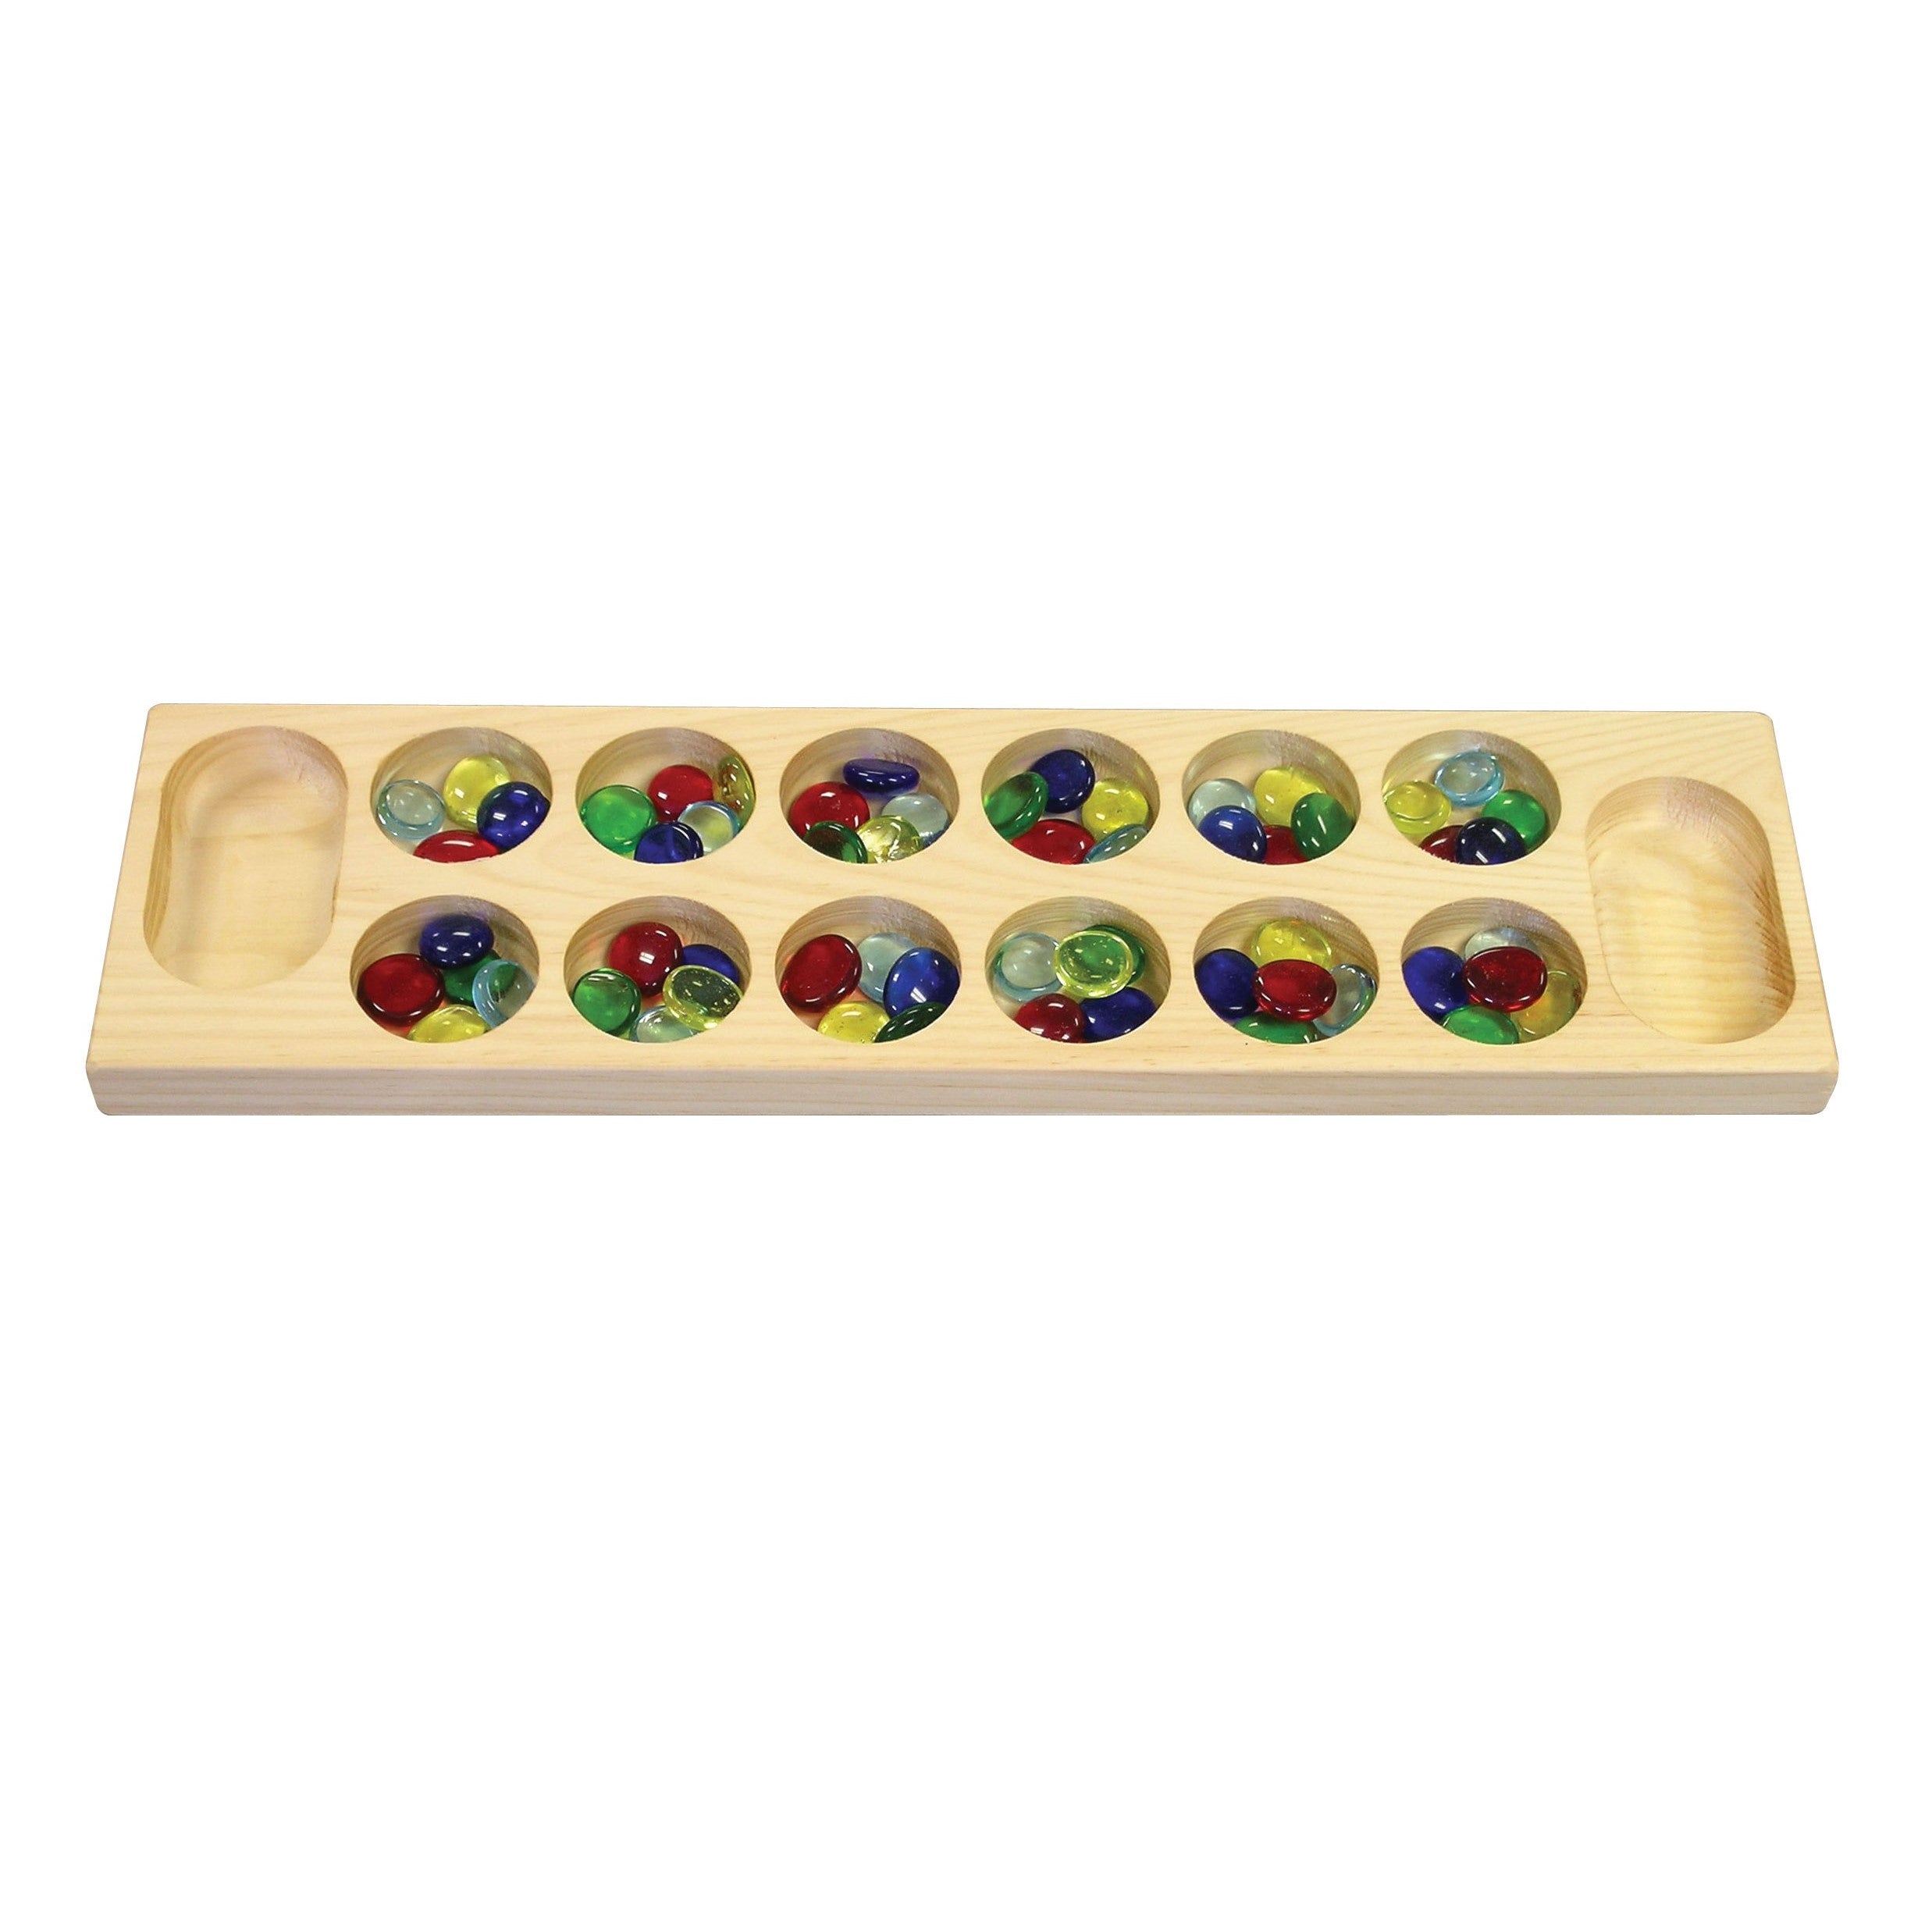 Marbles Game With Round Wooden Tray for Children Outdoor Play 